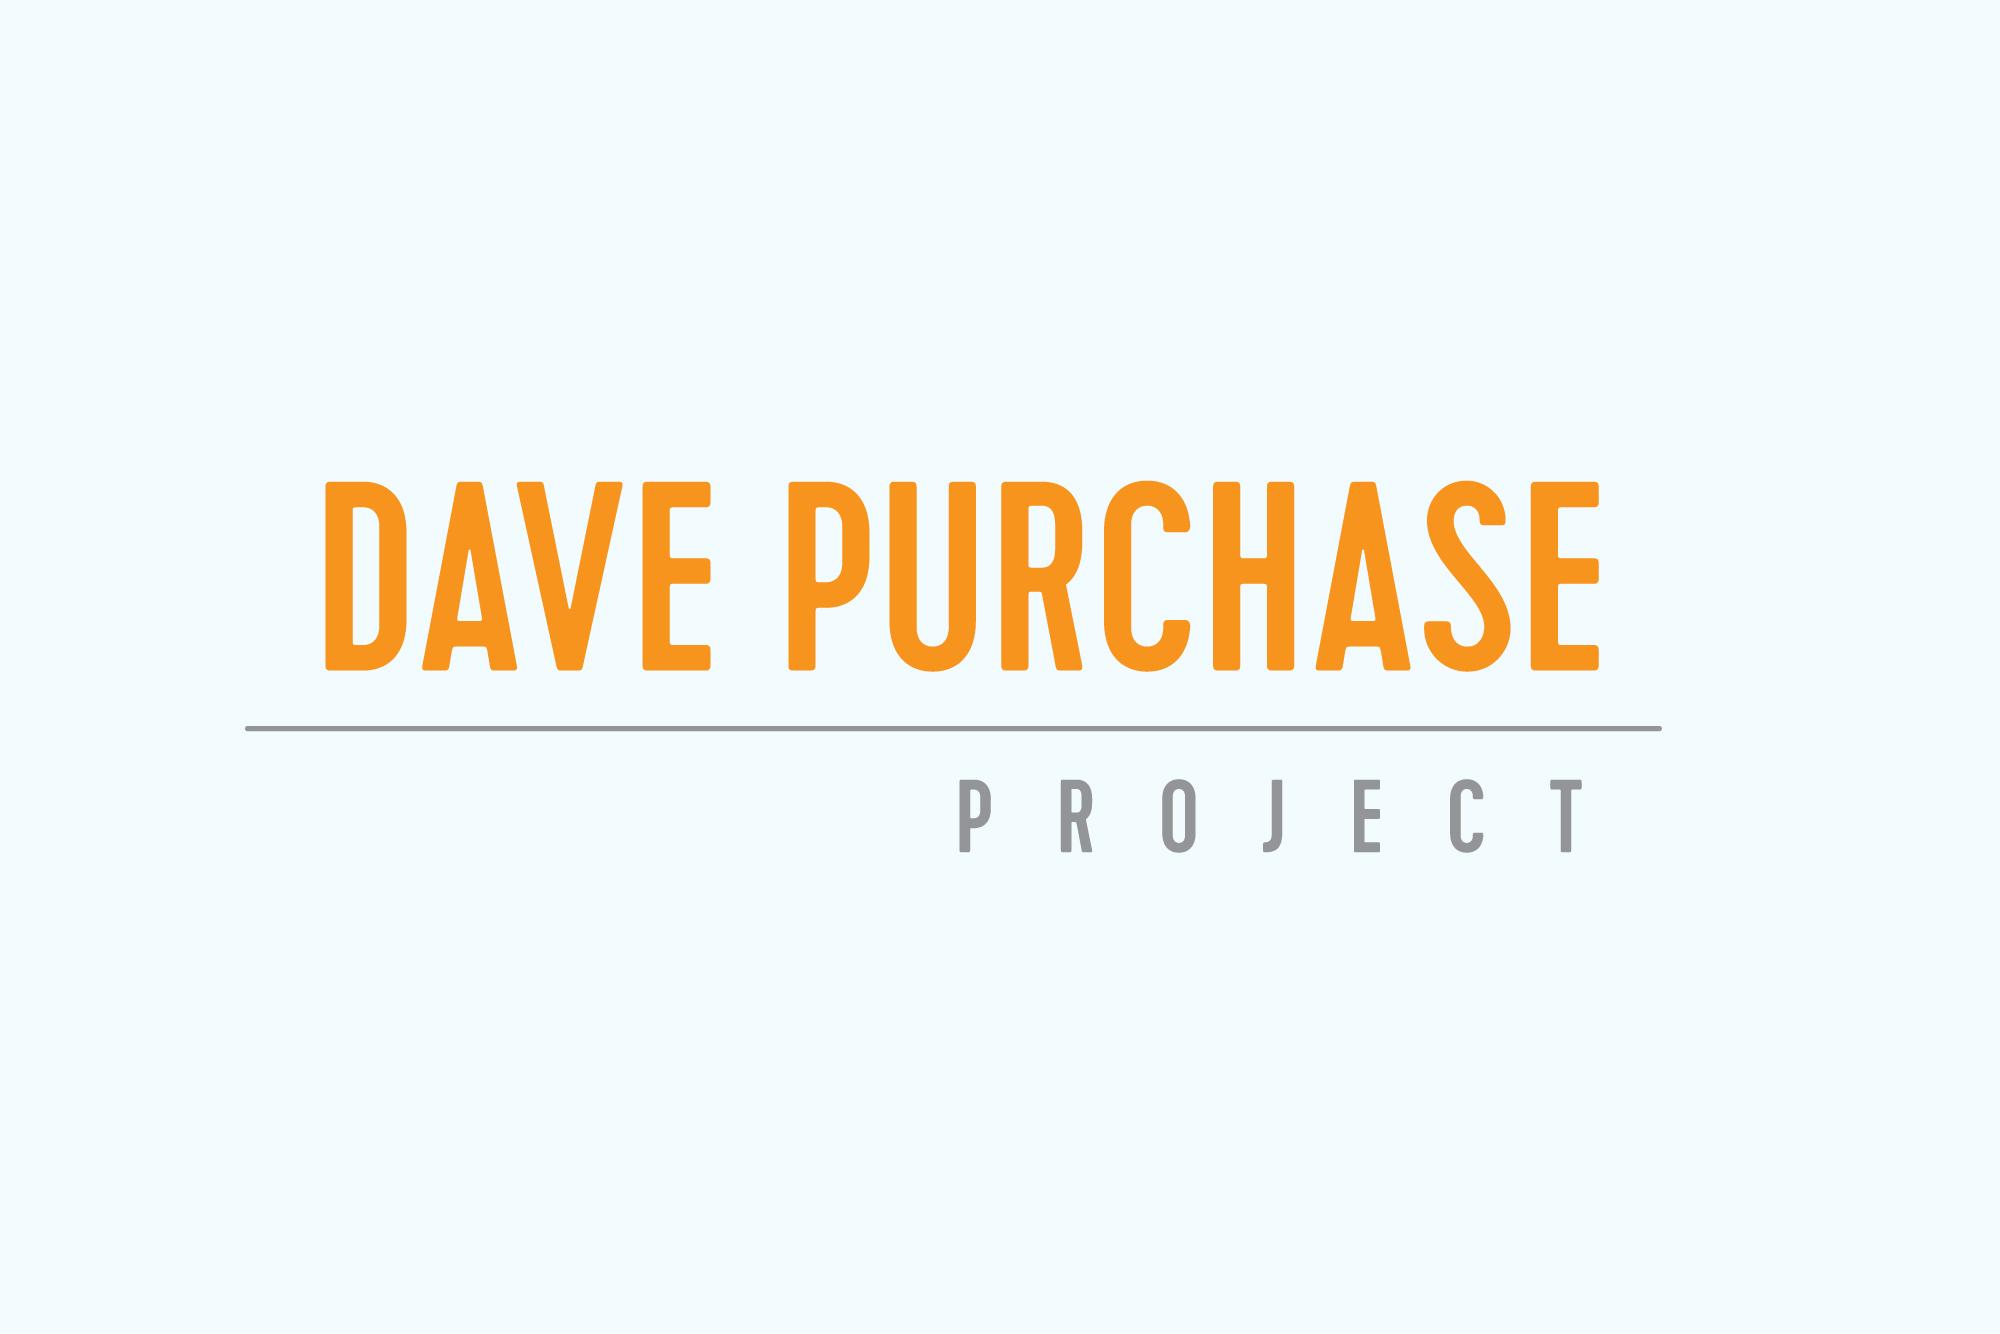 Dave Purchase Project logo